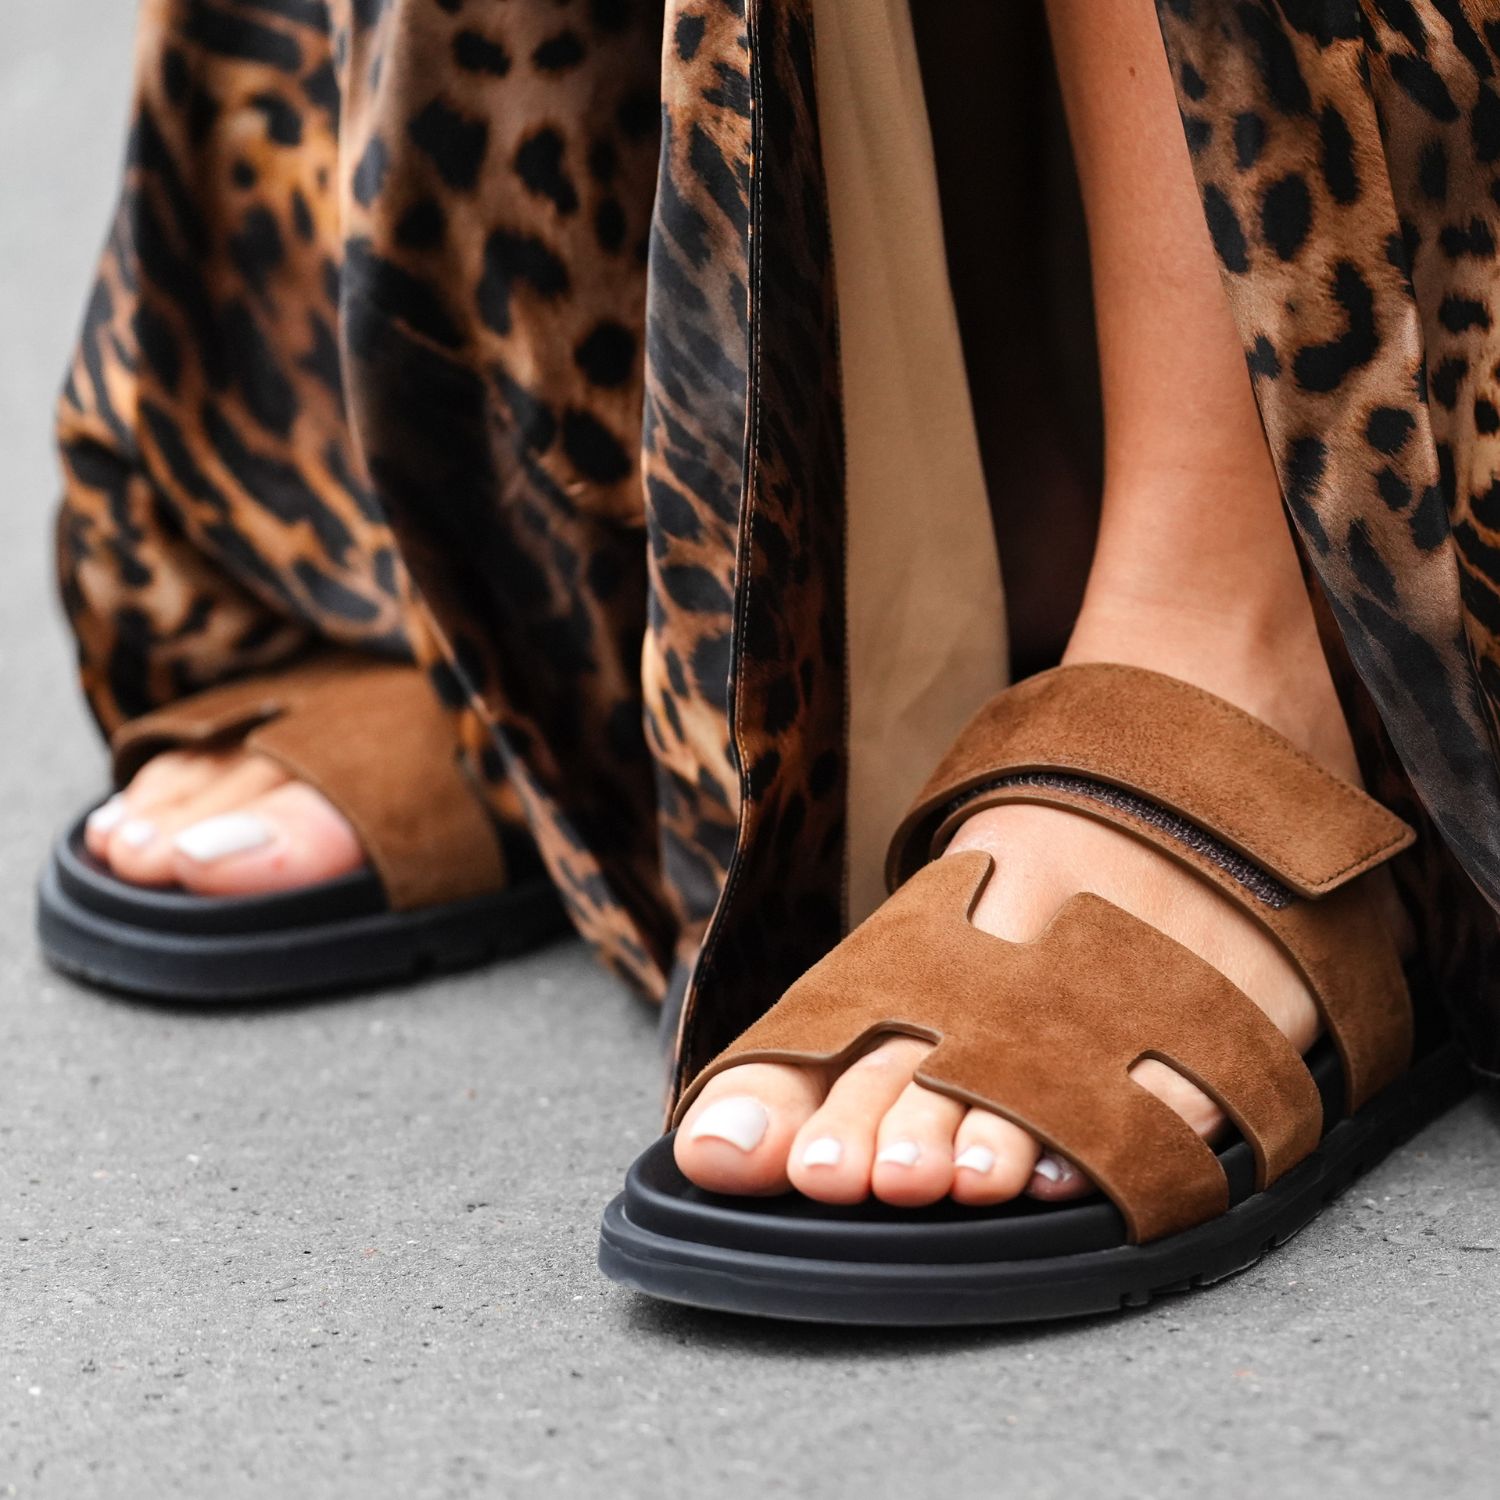  I've asked the experts—these 7 pedicure shades are the best colours to wear on your toes this summer 